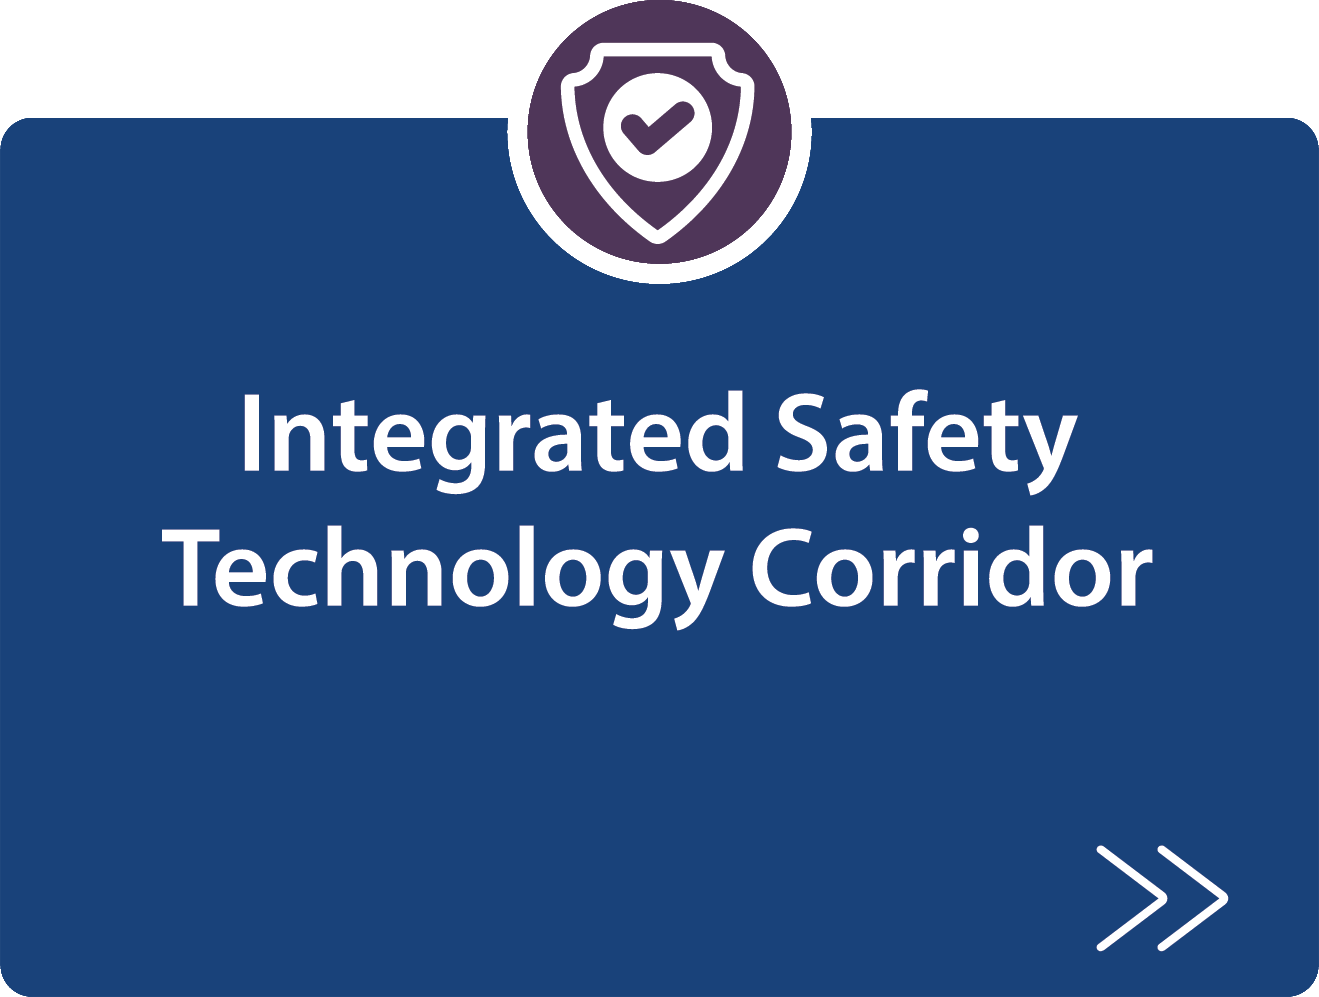 integrated Safety Technology Corridor project description